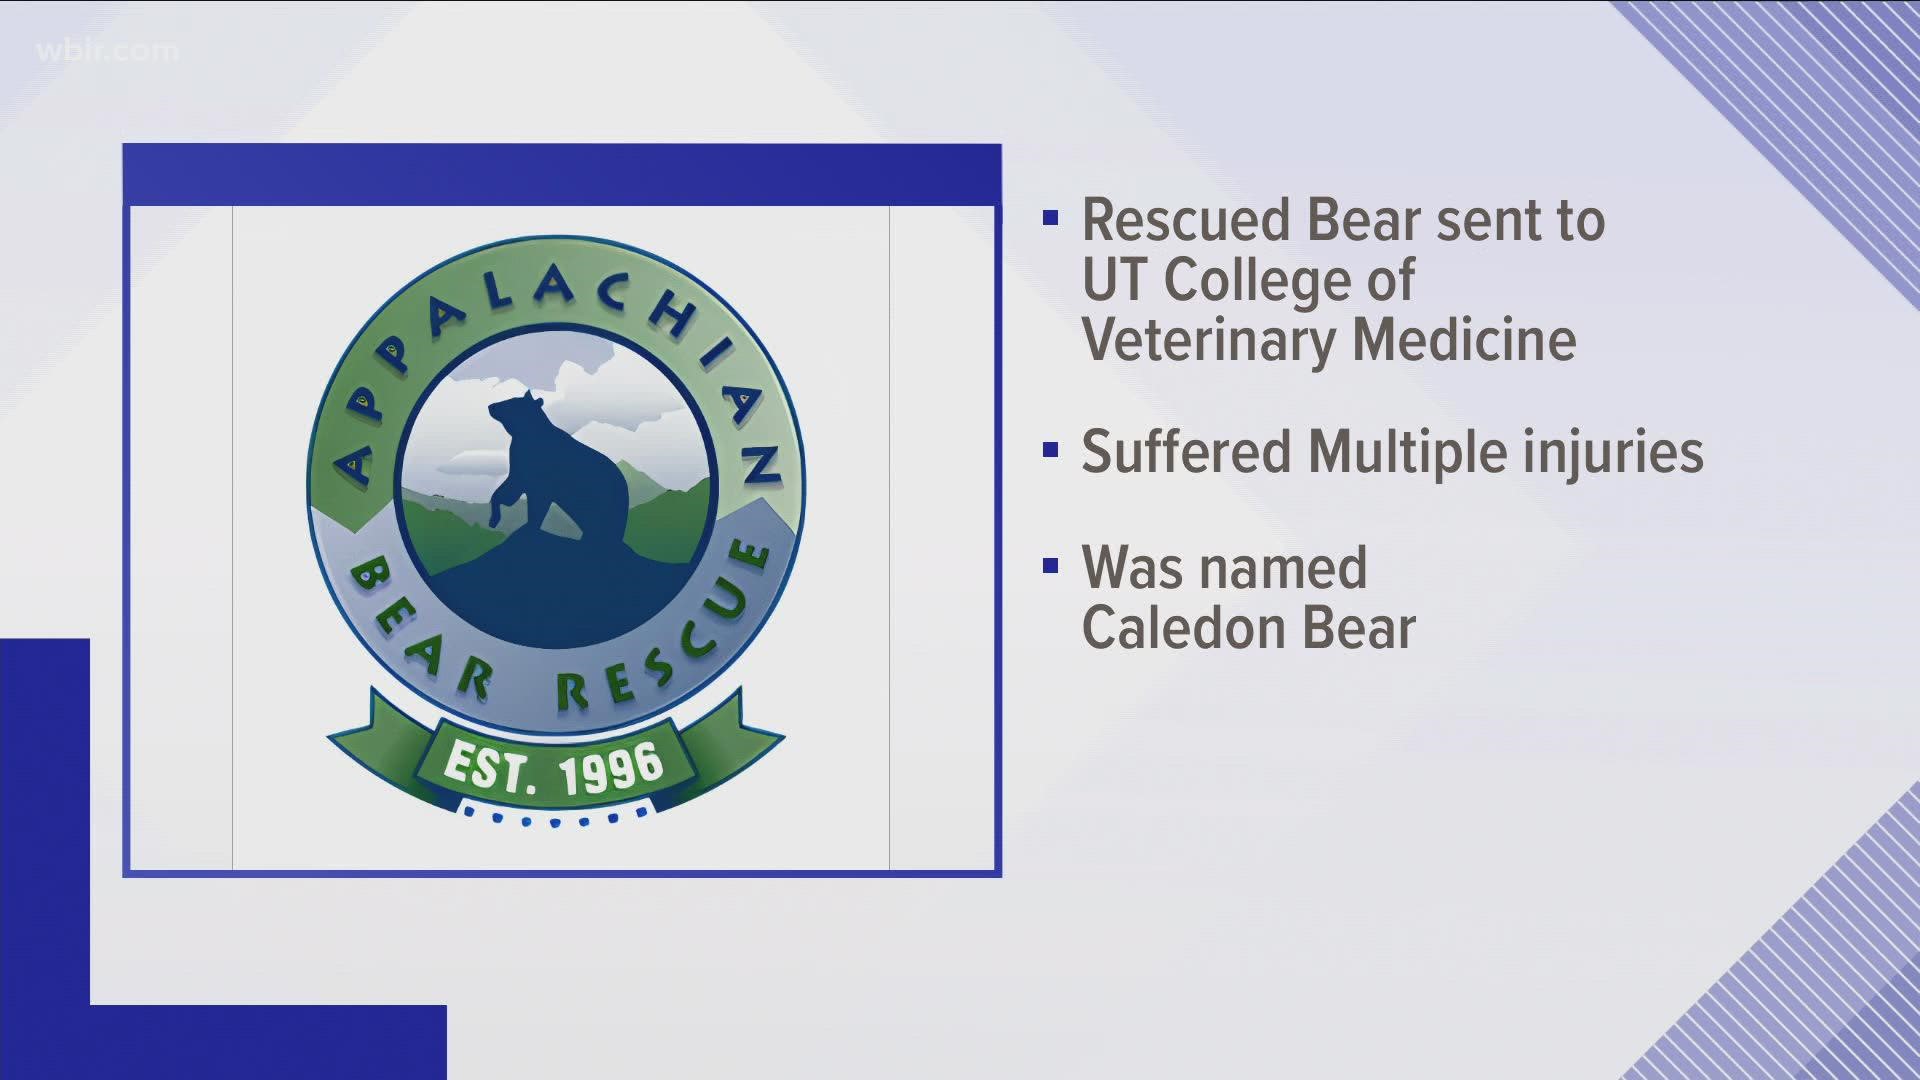 Appalachian Bear Rescue said the injuries of the bear were consistent with a car accident.